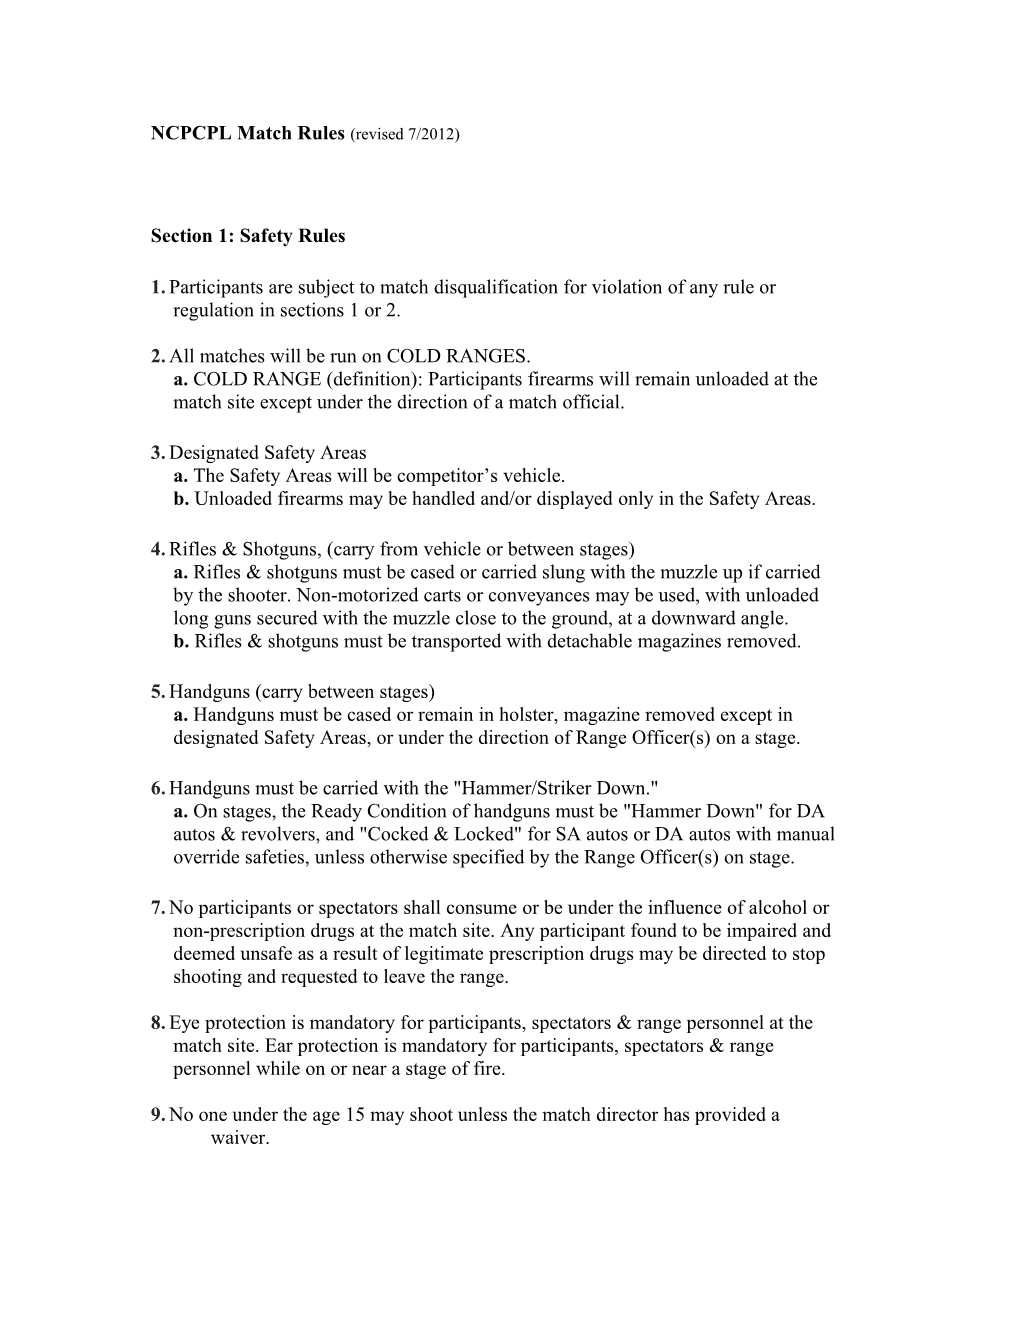 NCPCPL Match Rules (Revised 7/2012)